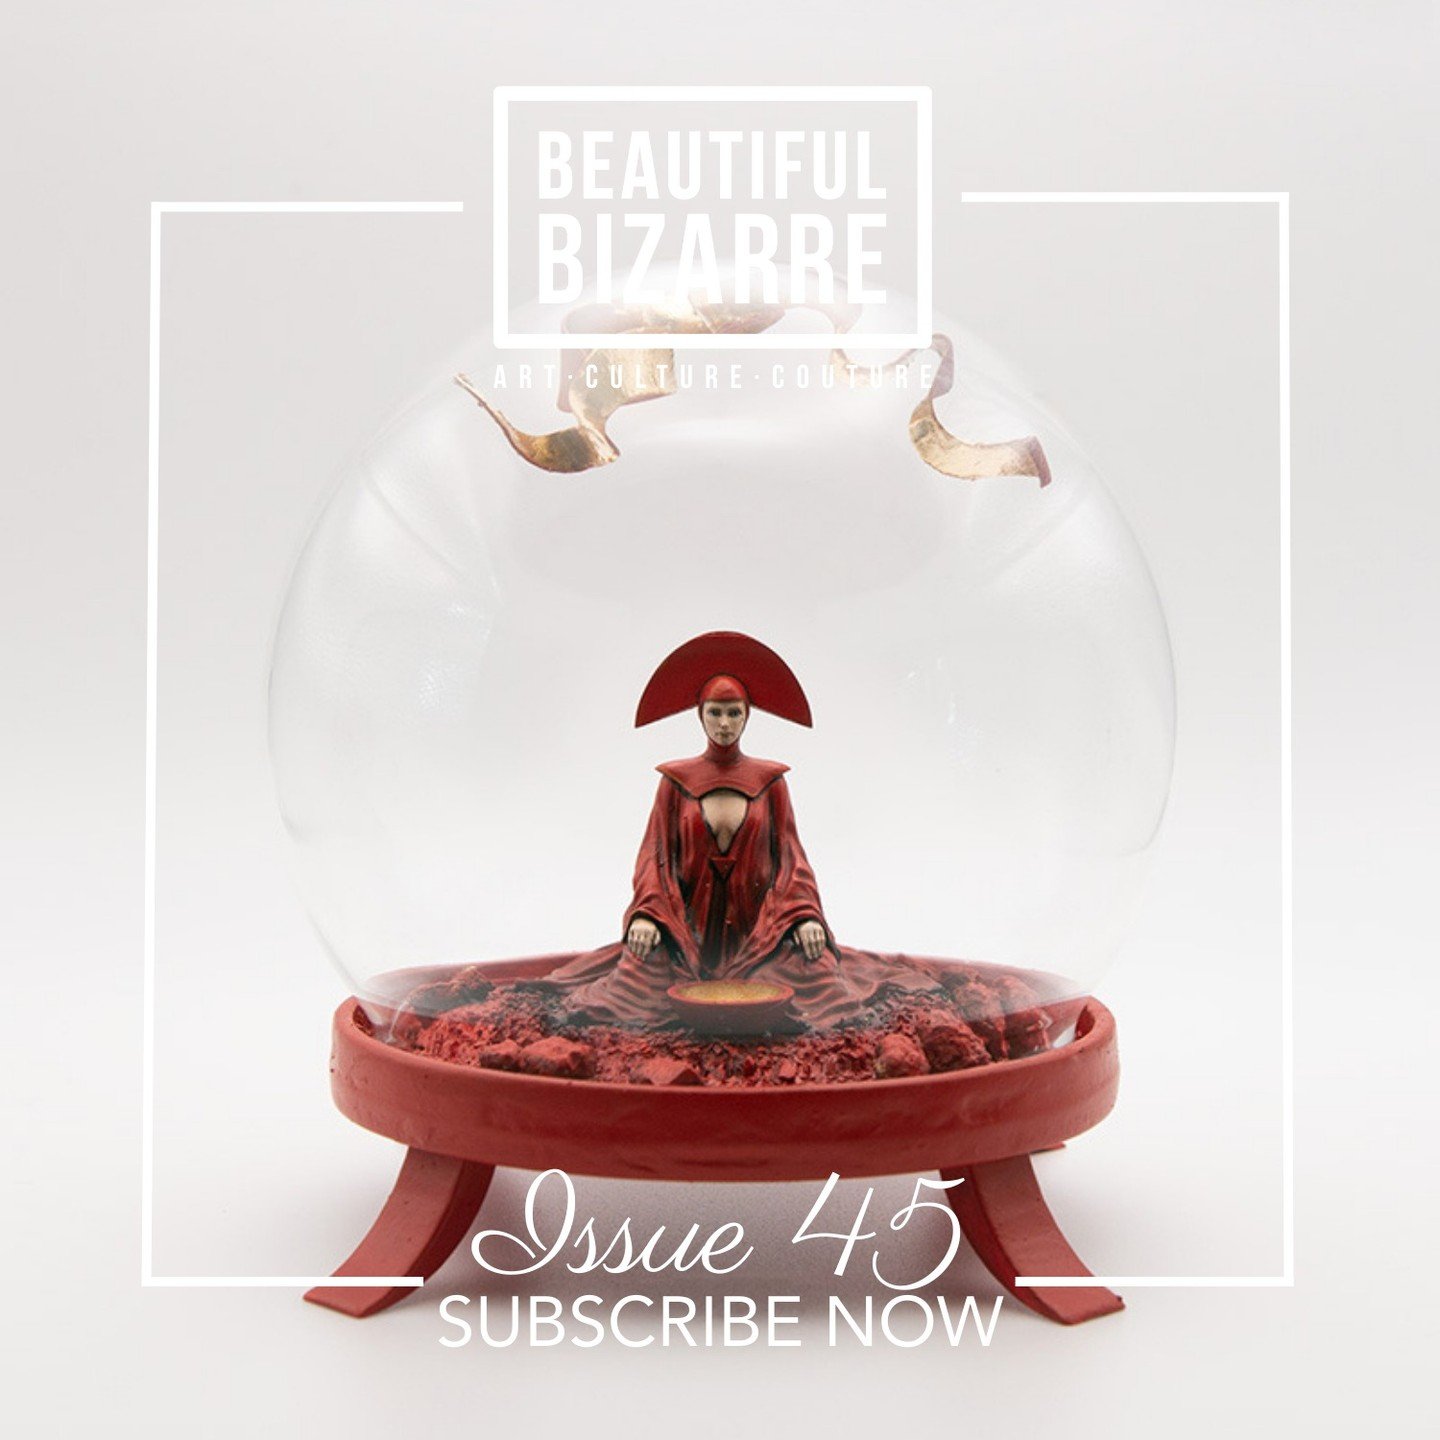 I have a little feature in the 45th Issue of @beautifulbizarremagazine , in print and online.

You can get a copy at: https://store.beautifulbizarre.net/product/issue-45-pre-order/

INSIDE ISSUE 45:
&bull; Interviews: @arantzasestayoworks [cover arti